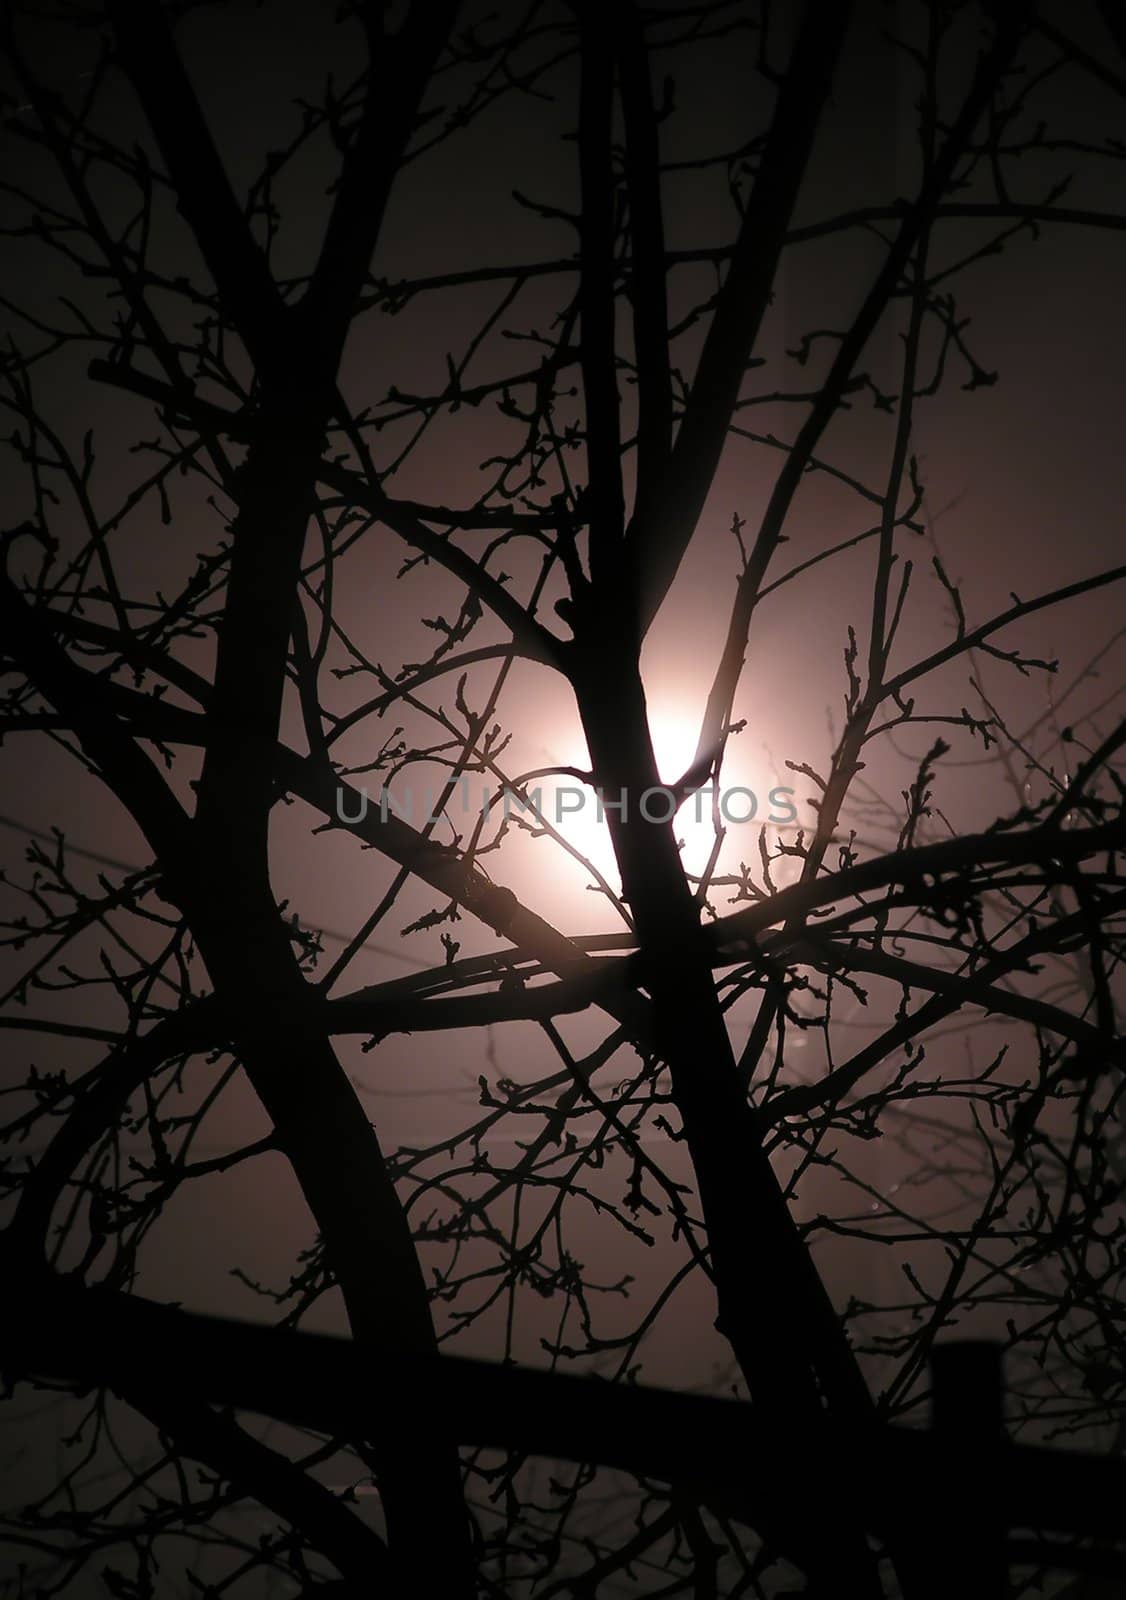 The abstract background representing branches of a tree against light of the moon in a fog